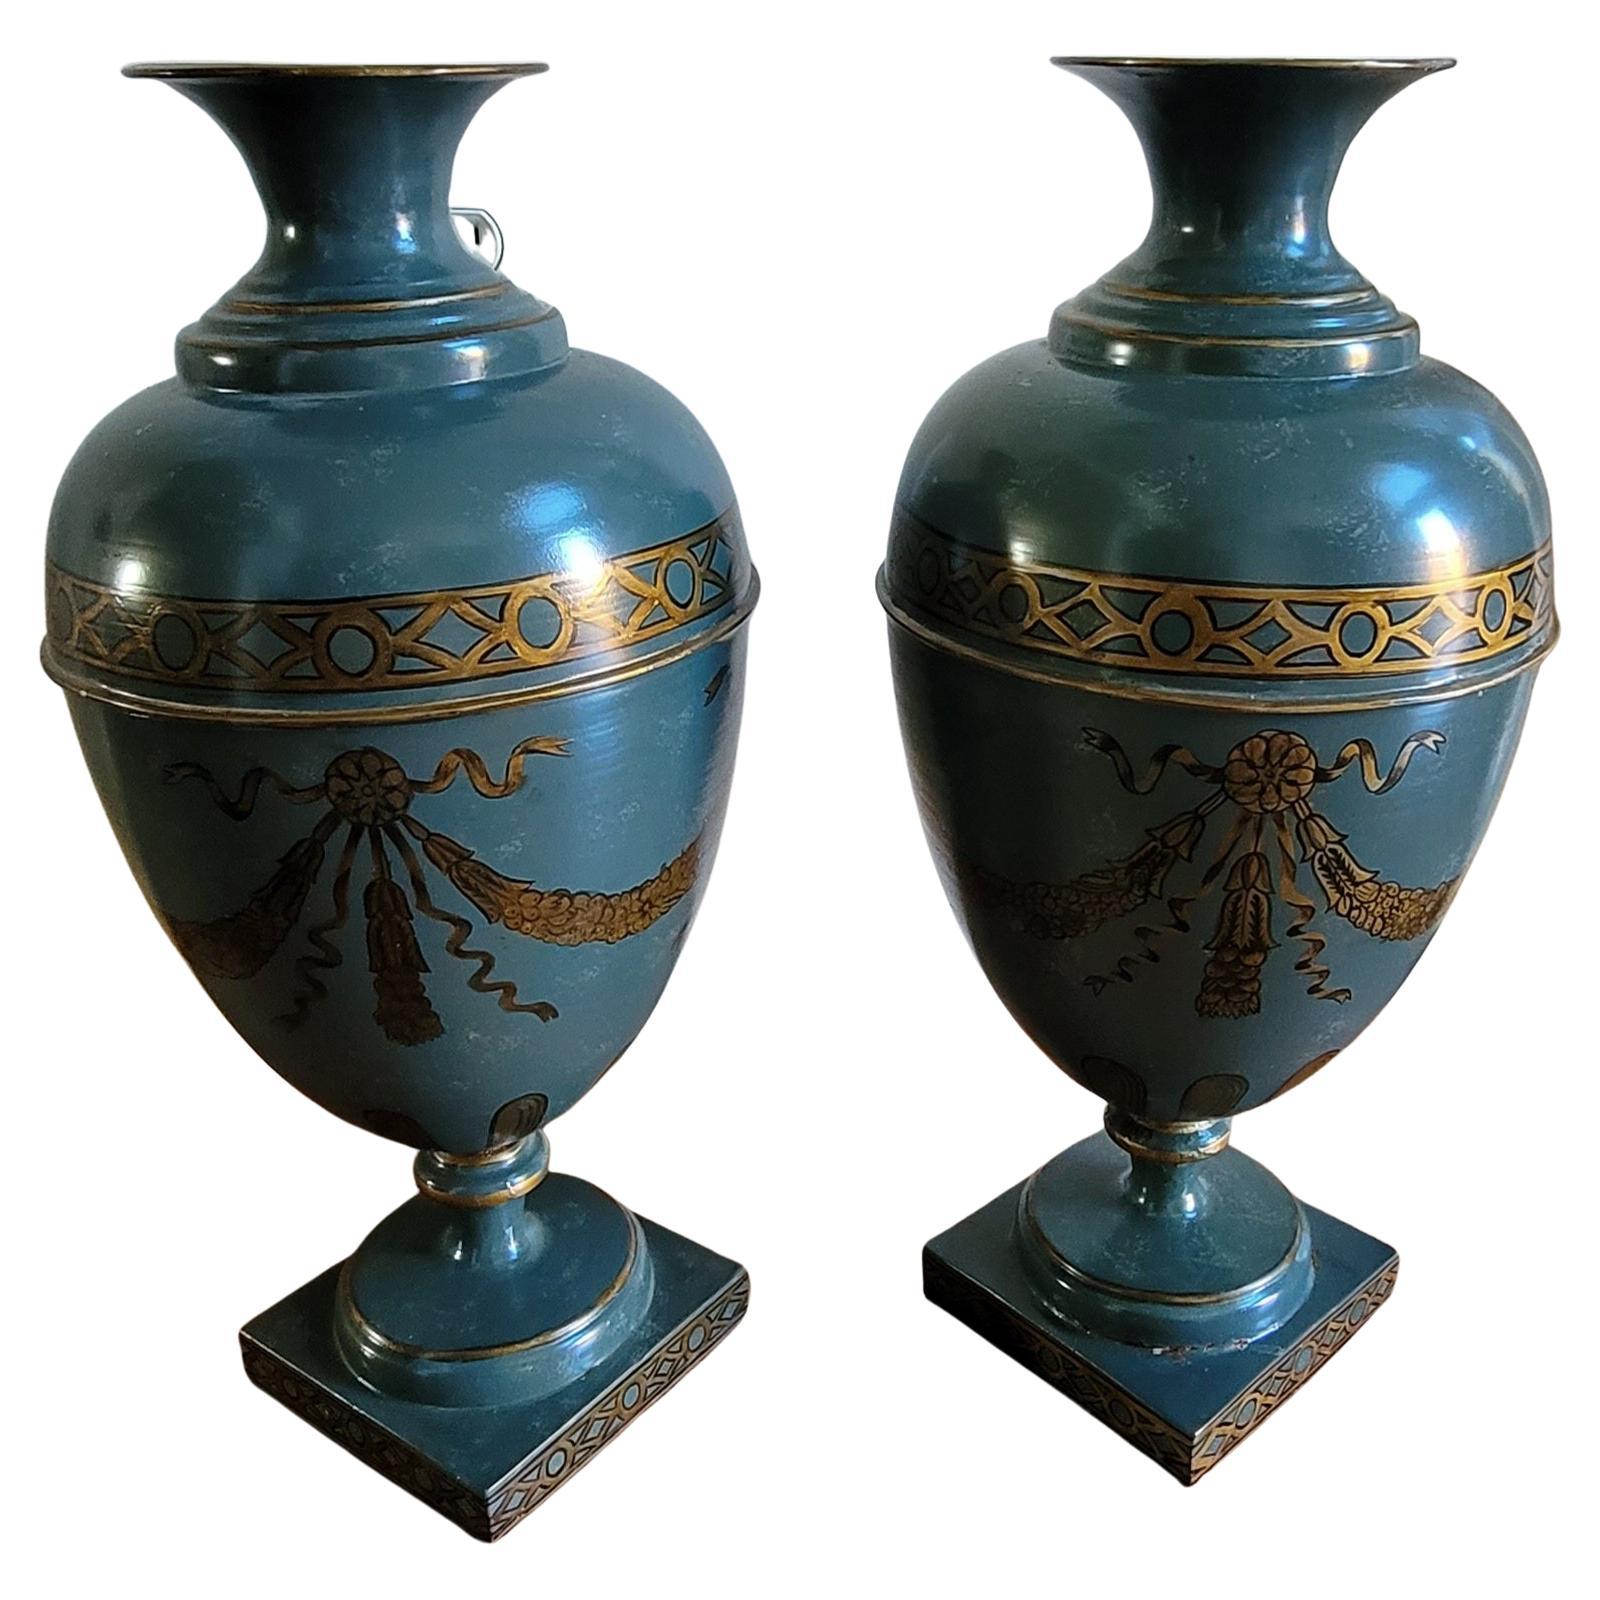 A charming pair of hand-painted metal vases by Interior Concepts. Felt lined bottom. 
Measure 9